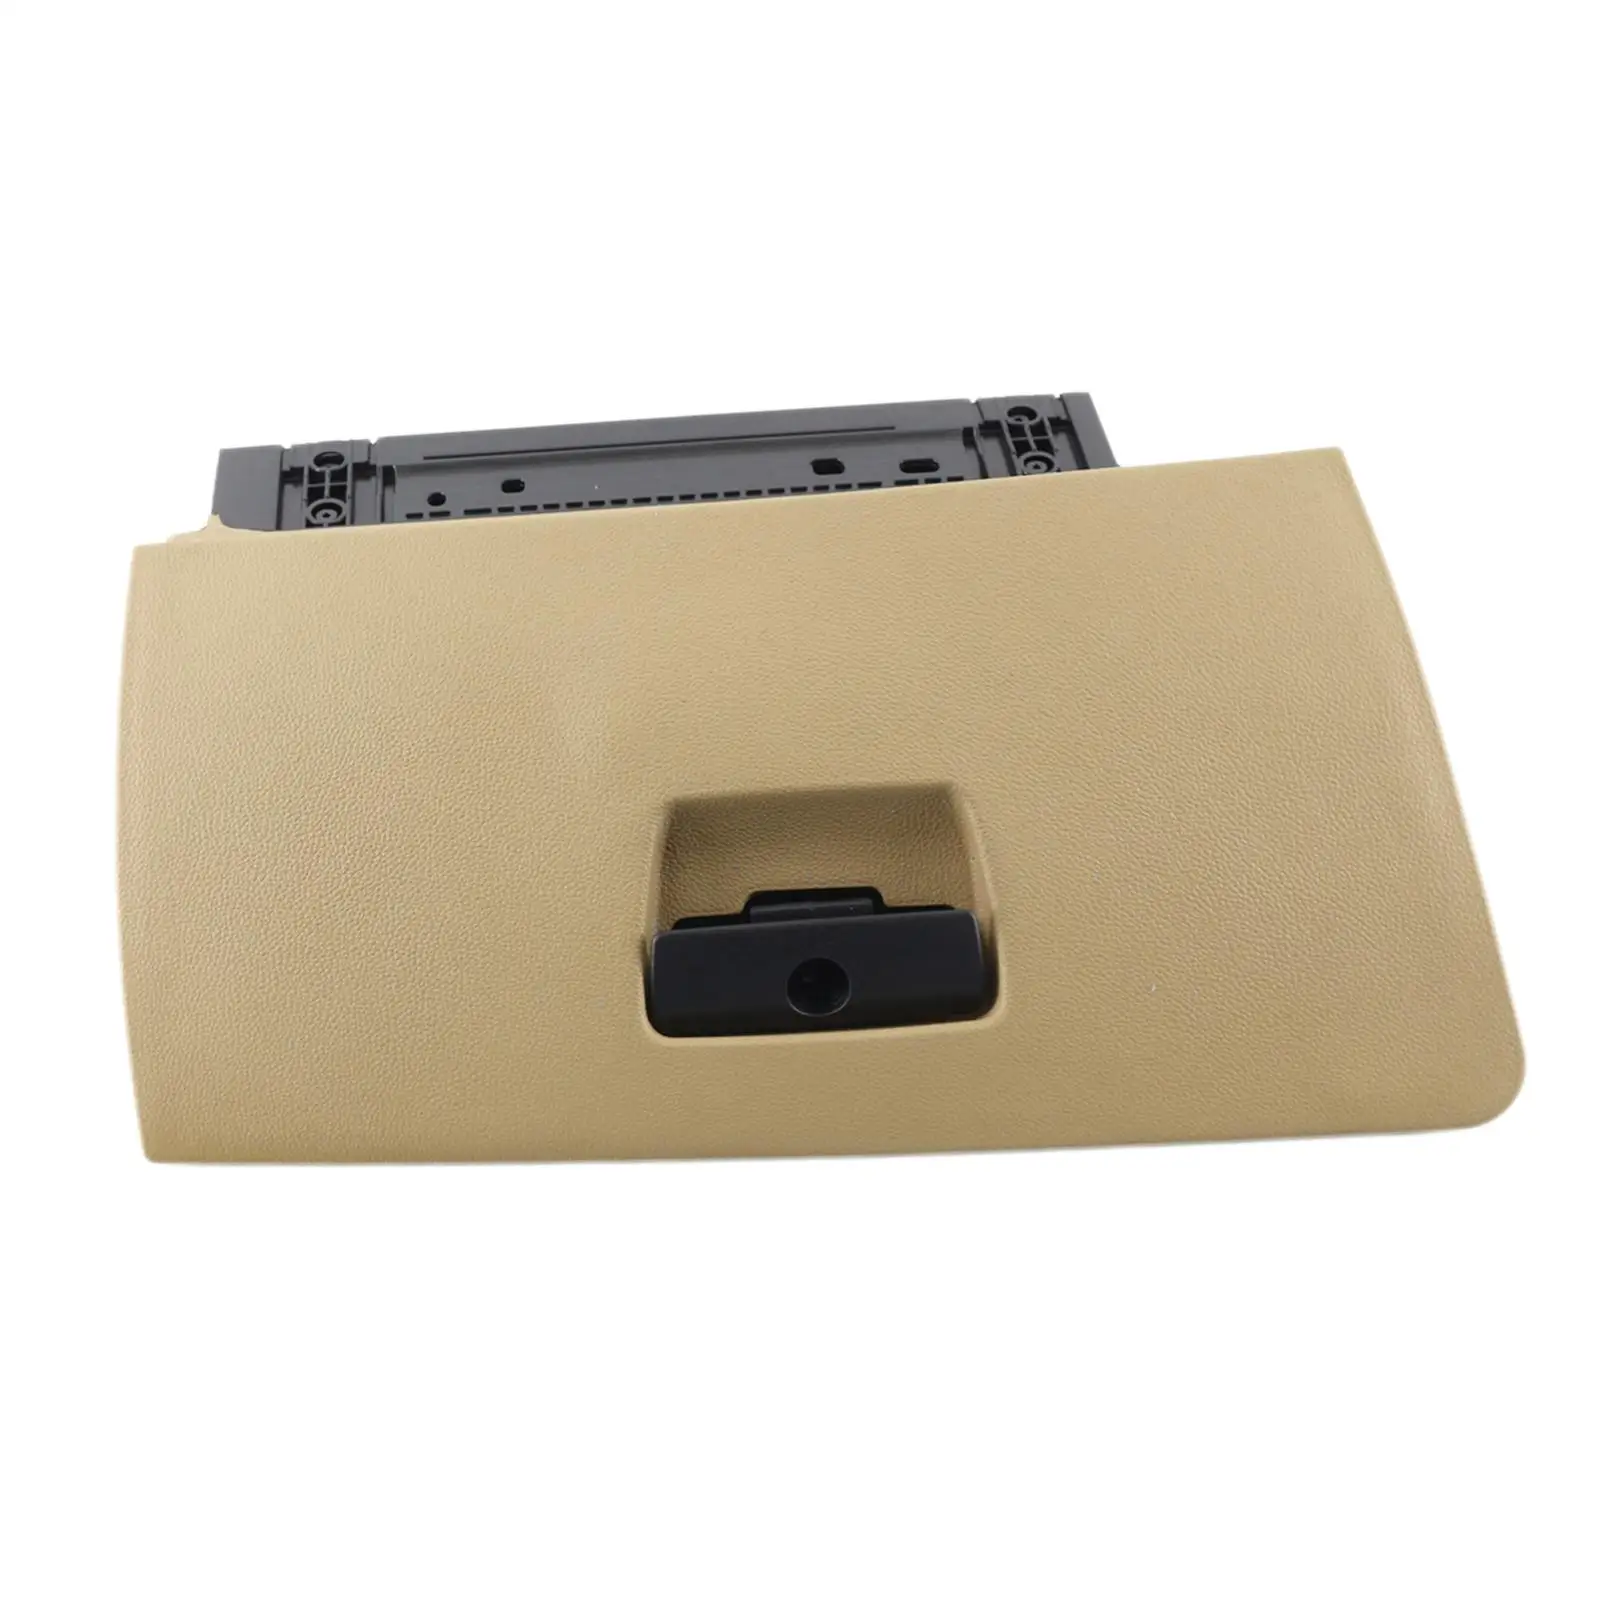 Glovebox Accessory Practical Easy to Install Replaces Durable Parts Glove Box Storage Compartment for BMW E90 D91 E92 06-13